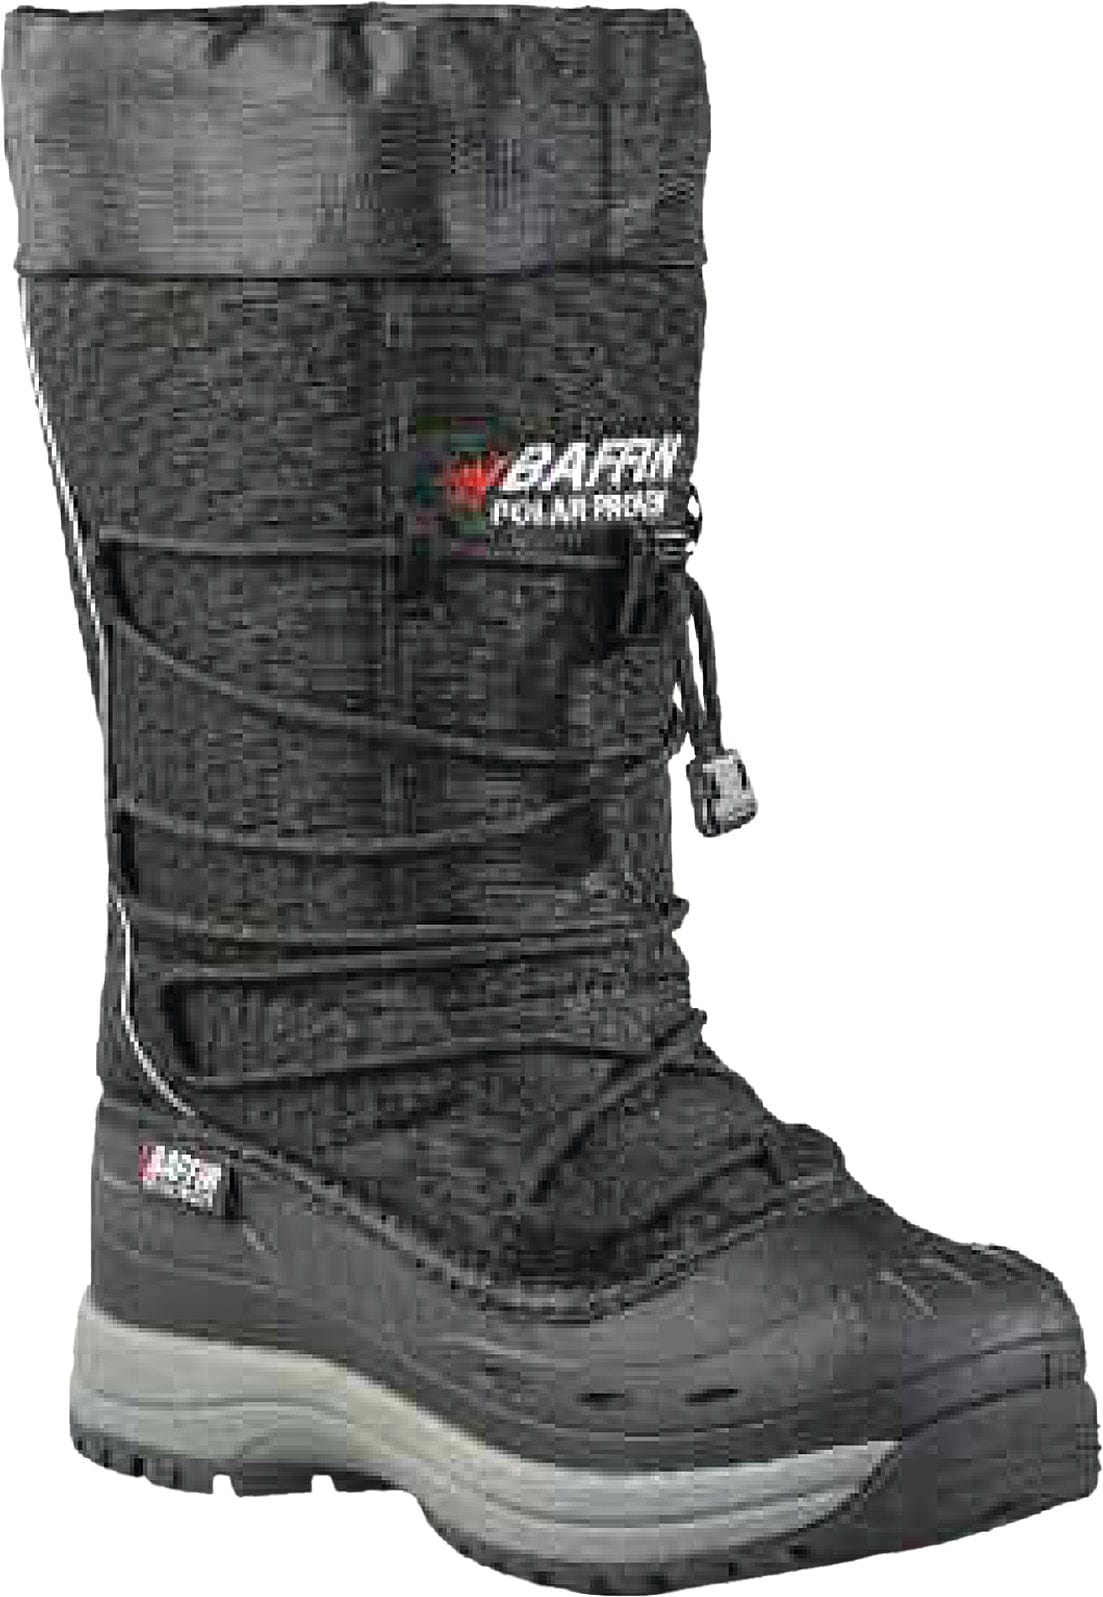 Western Powersports Boots Black / 6 Women's Snogoose Boots by Baffin 4510-1330-001-06